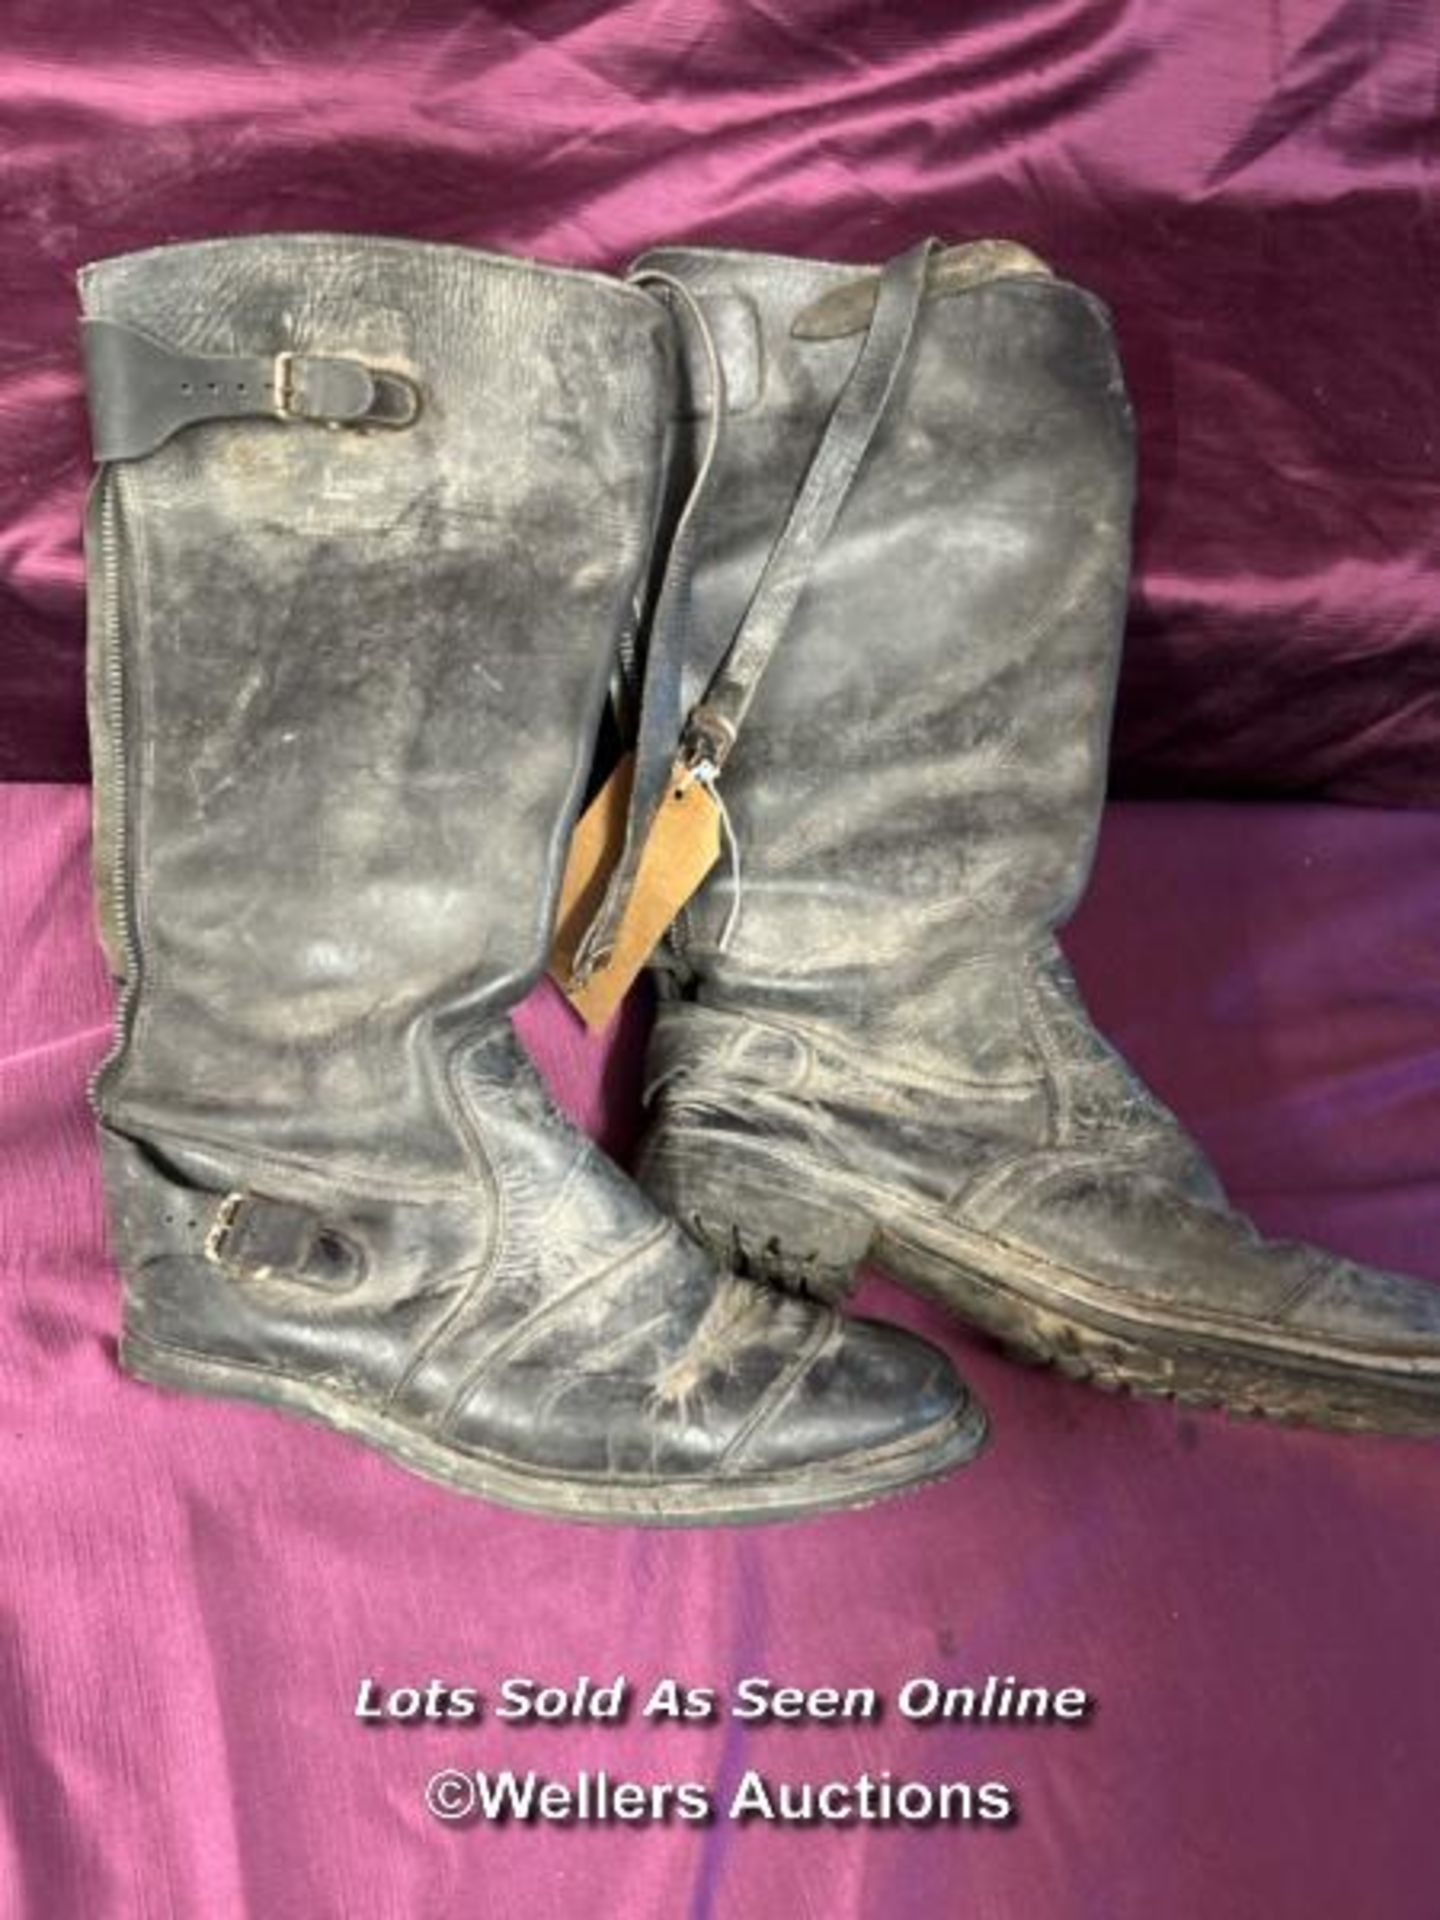 PAIR OF VINTAGE LEWIS LEATHERS BIKERS BOOTS - Image 2 of 4